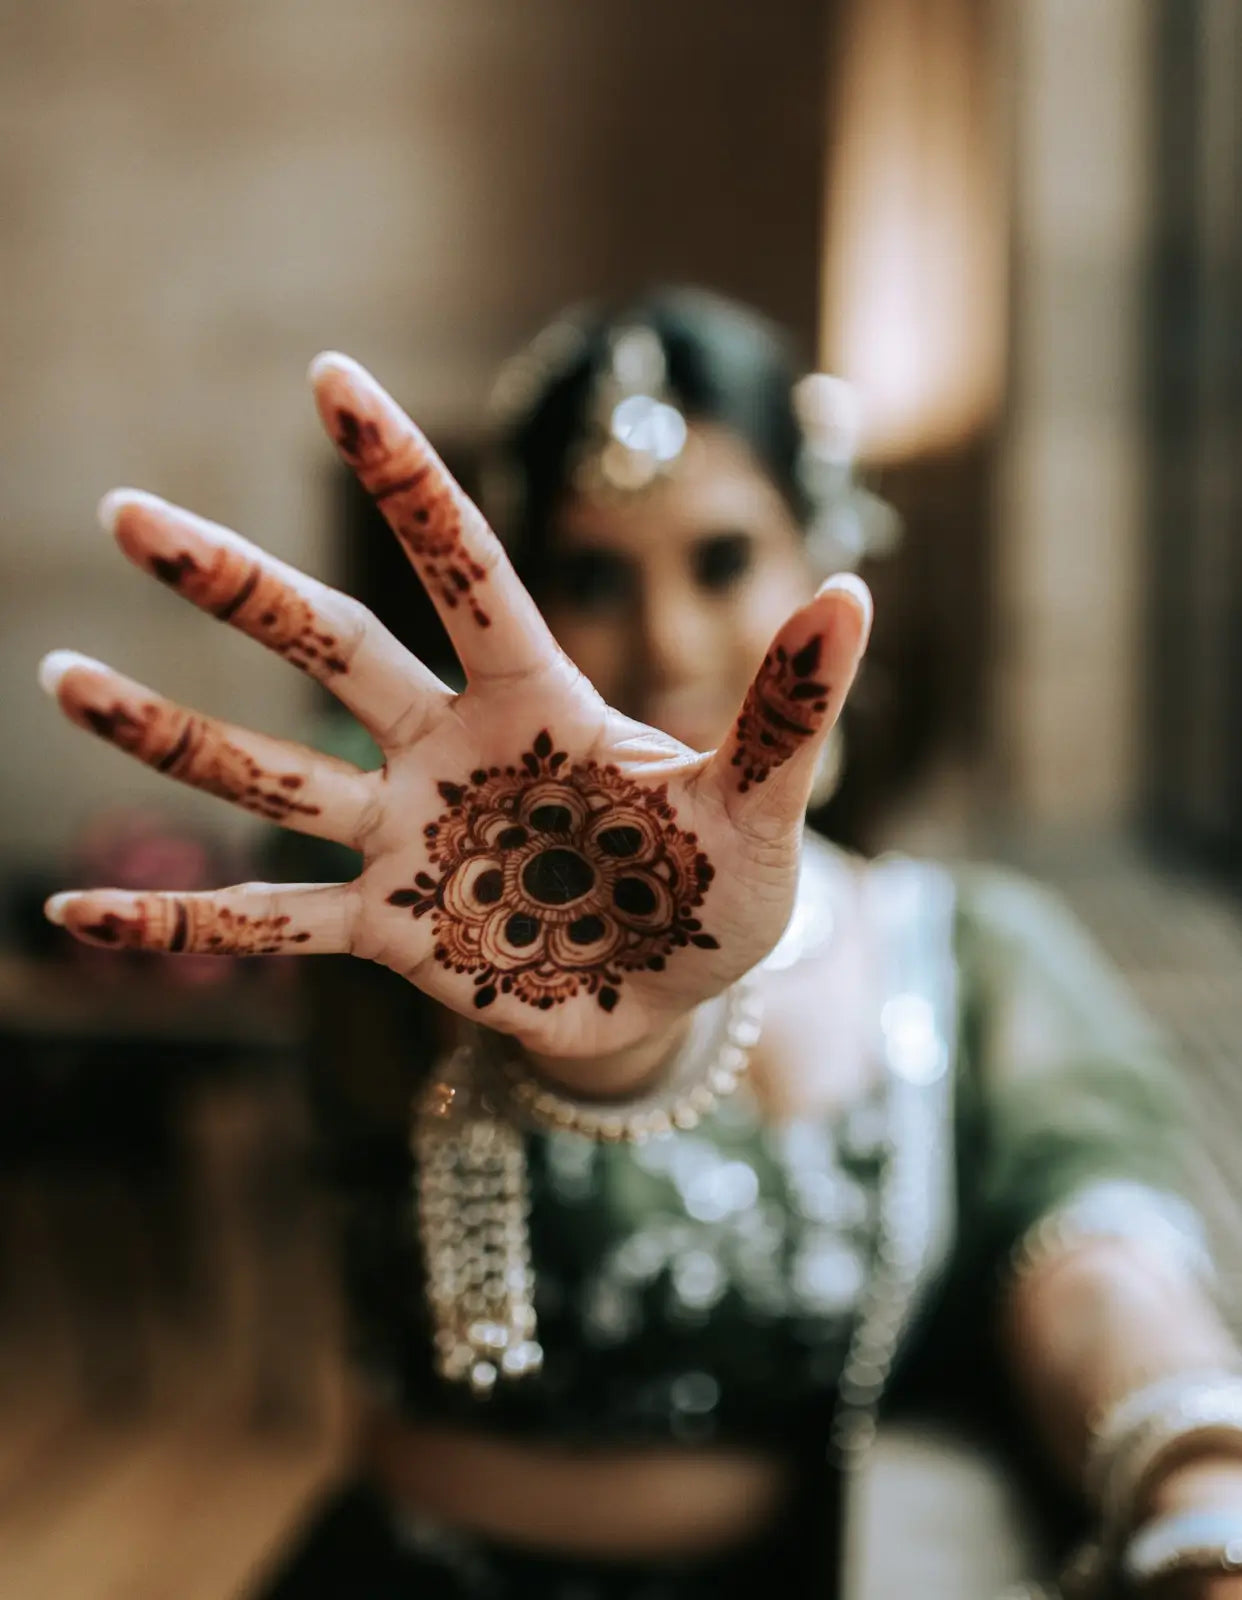 A temporary tattoo on a hand created by using henna powder for skin.